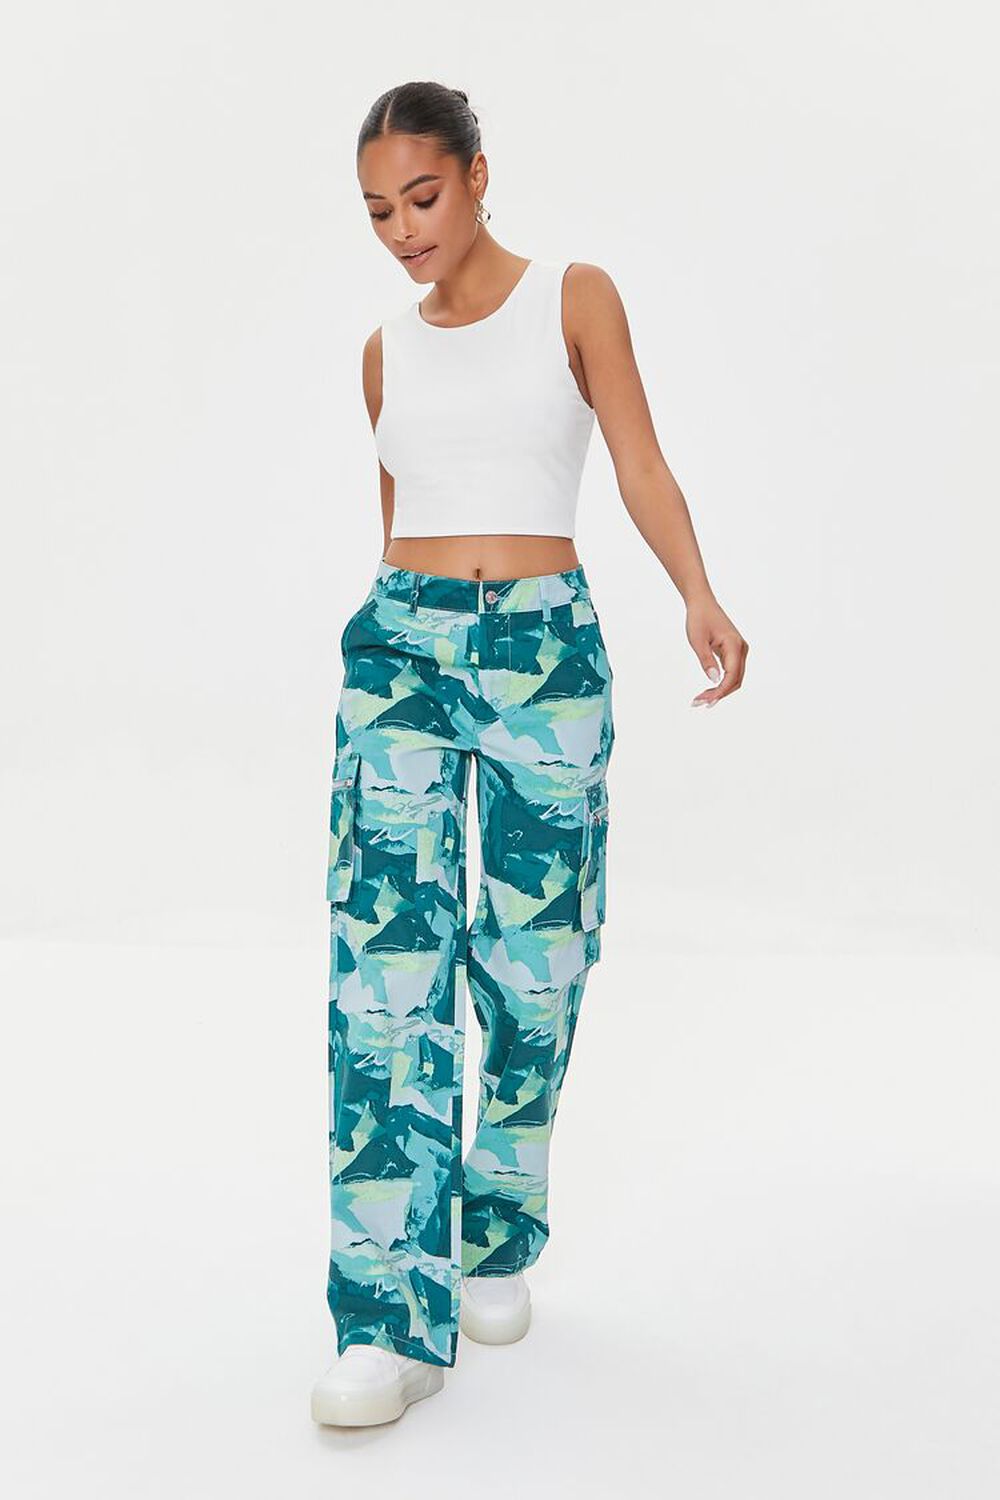 PEACOCK/MULTI Abstract Print Cargo Pants, image 1